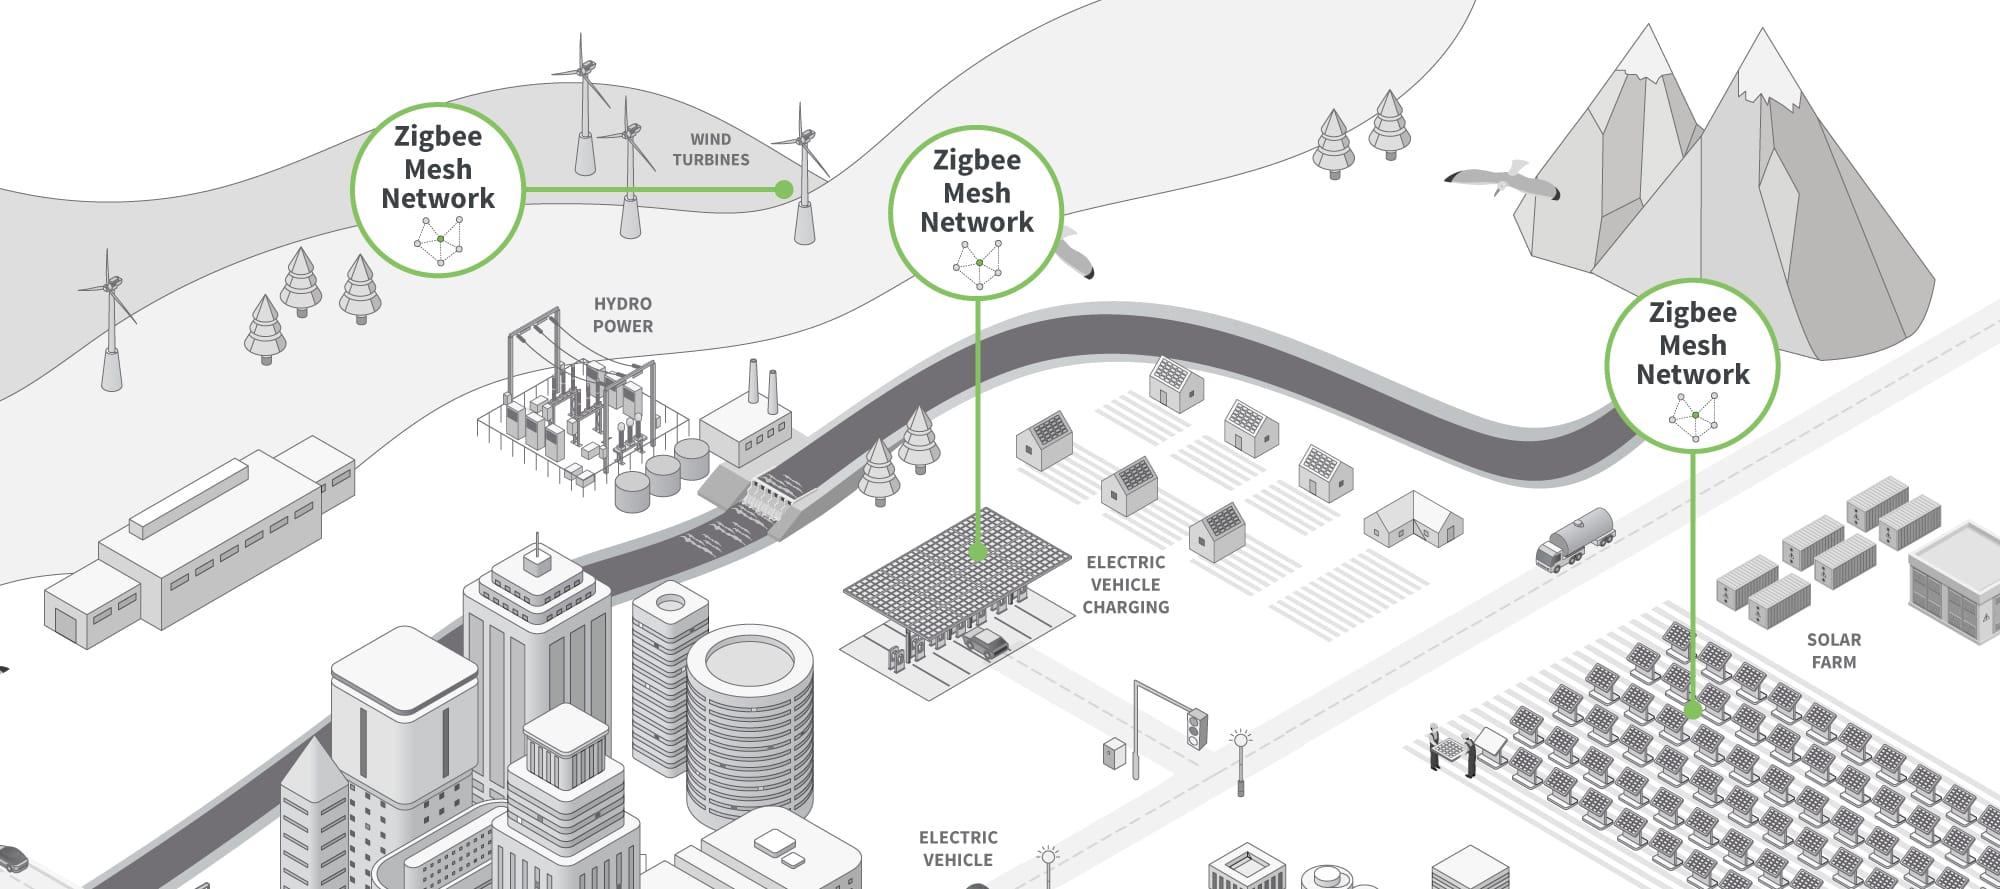 Diagram depicting mesh networking in a city